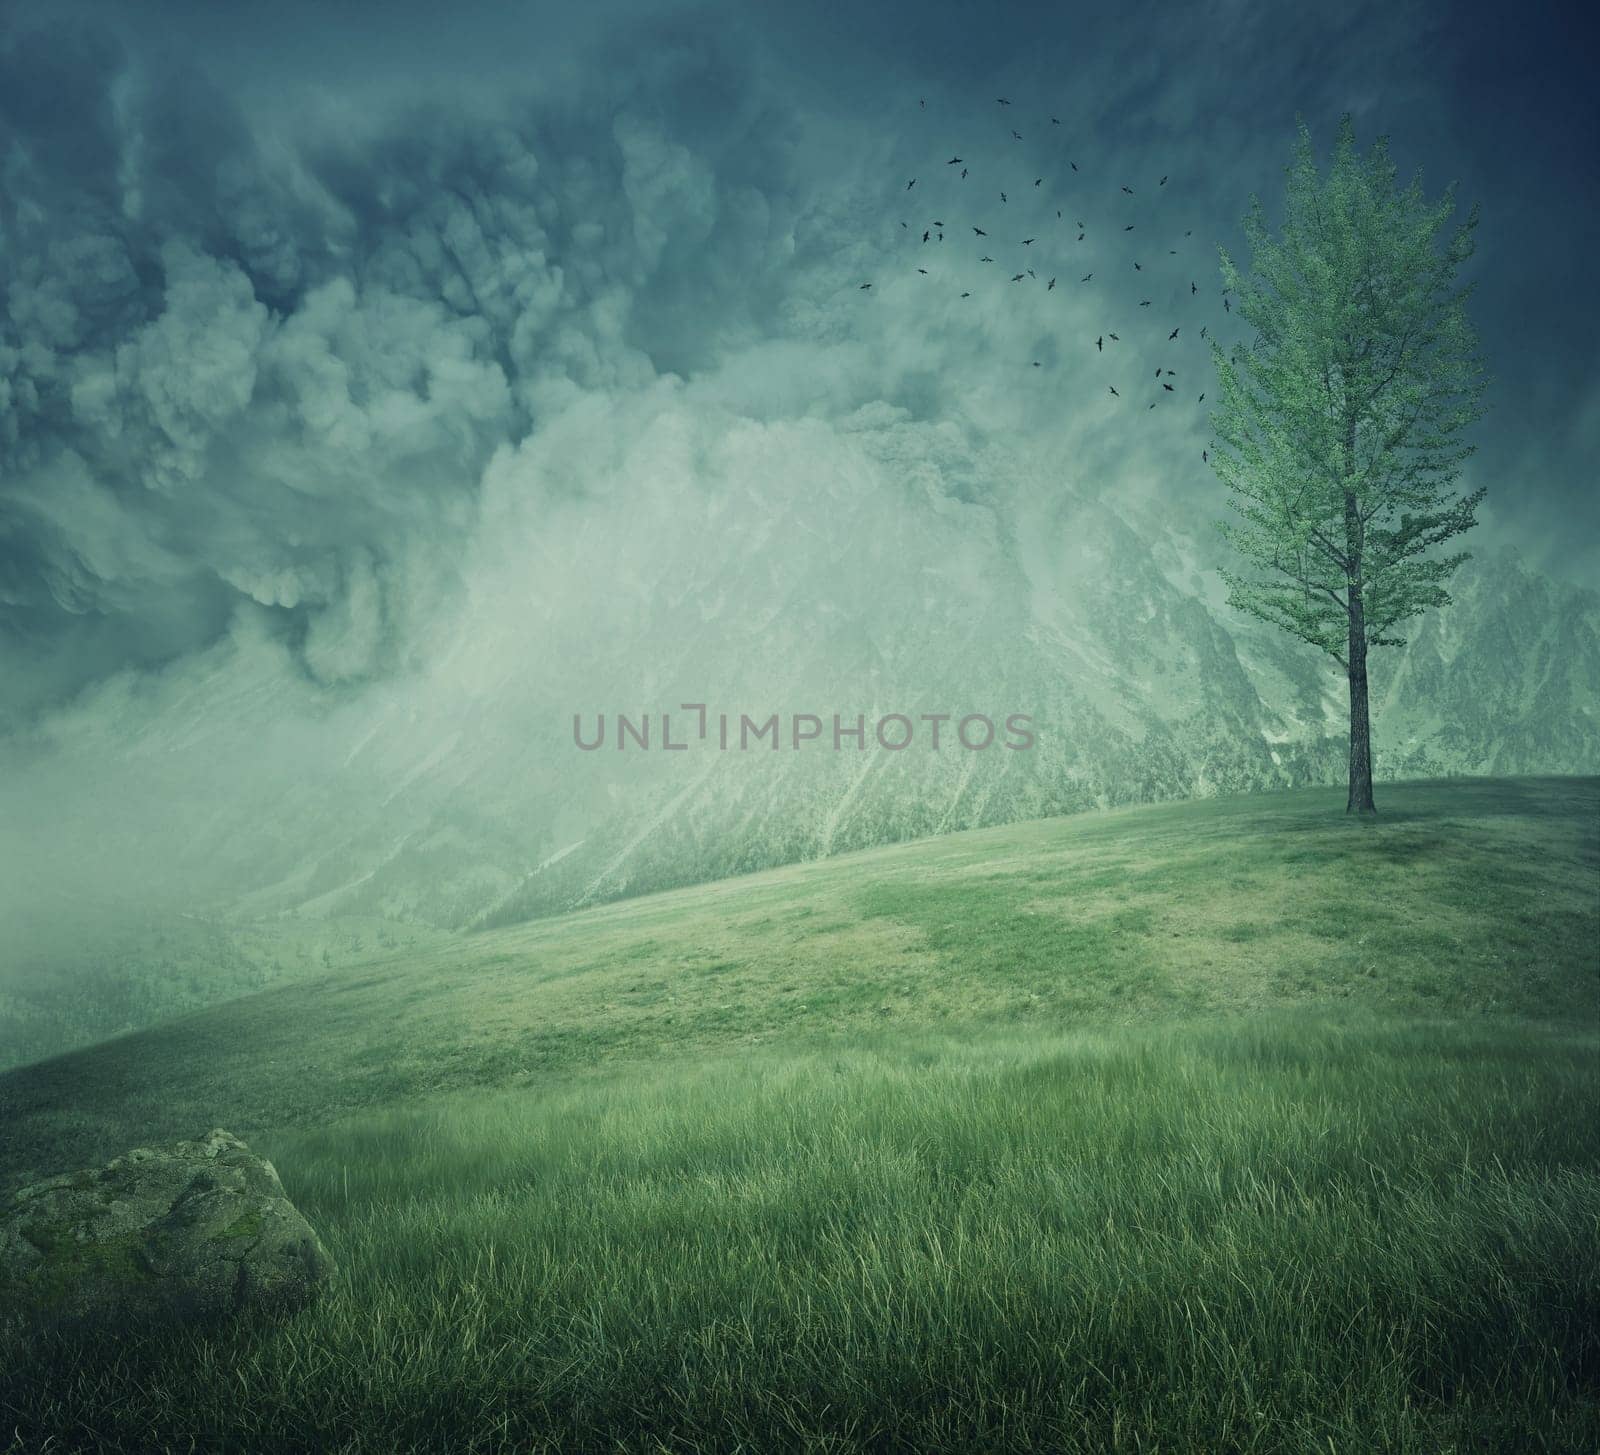 Mystycal mountain landscape with misty hills, green grass and a lone tree on the top. Beautiful and fresh background.